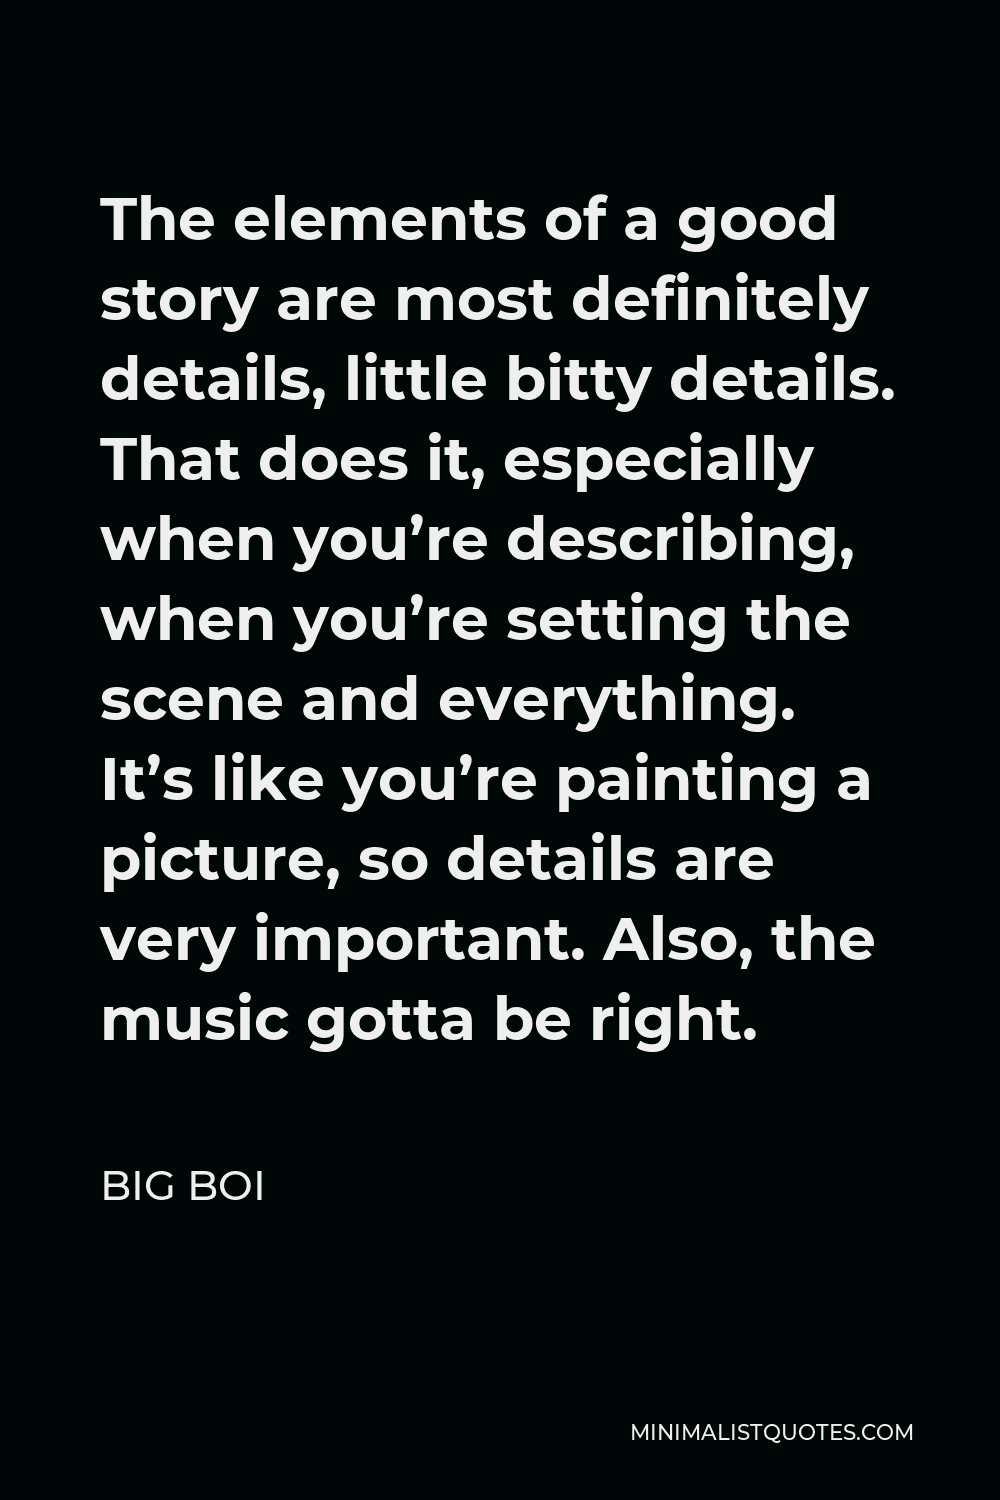 Big Boi Quote - The elements of a good story are most definitely details, little bitty details. That does it, especially when you’re describing, when you’re setting the scene and everything. It’s like you’re painting a picture, so details are very important. Also, the music gotta be right.